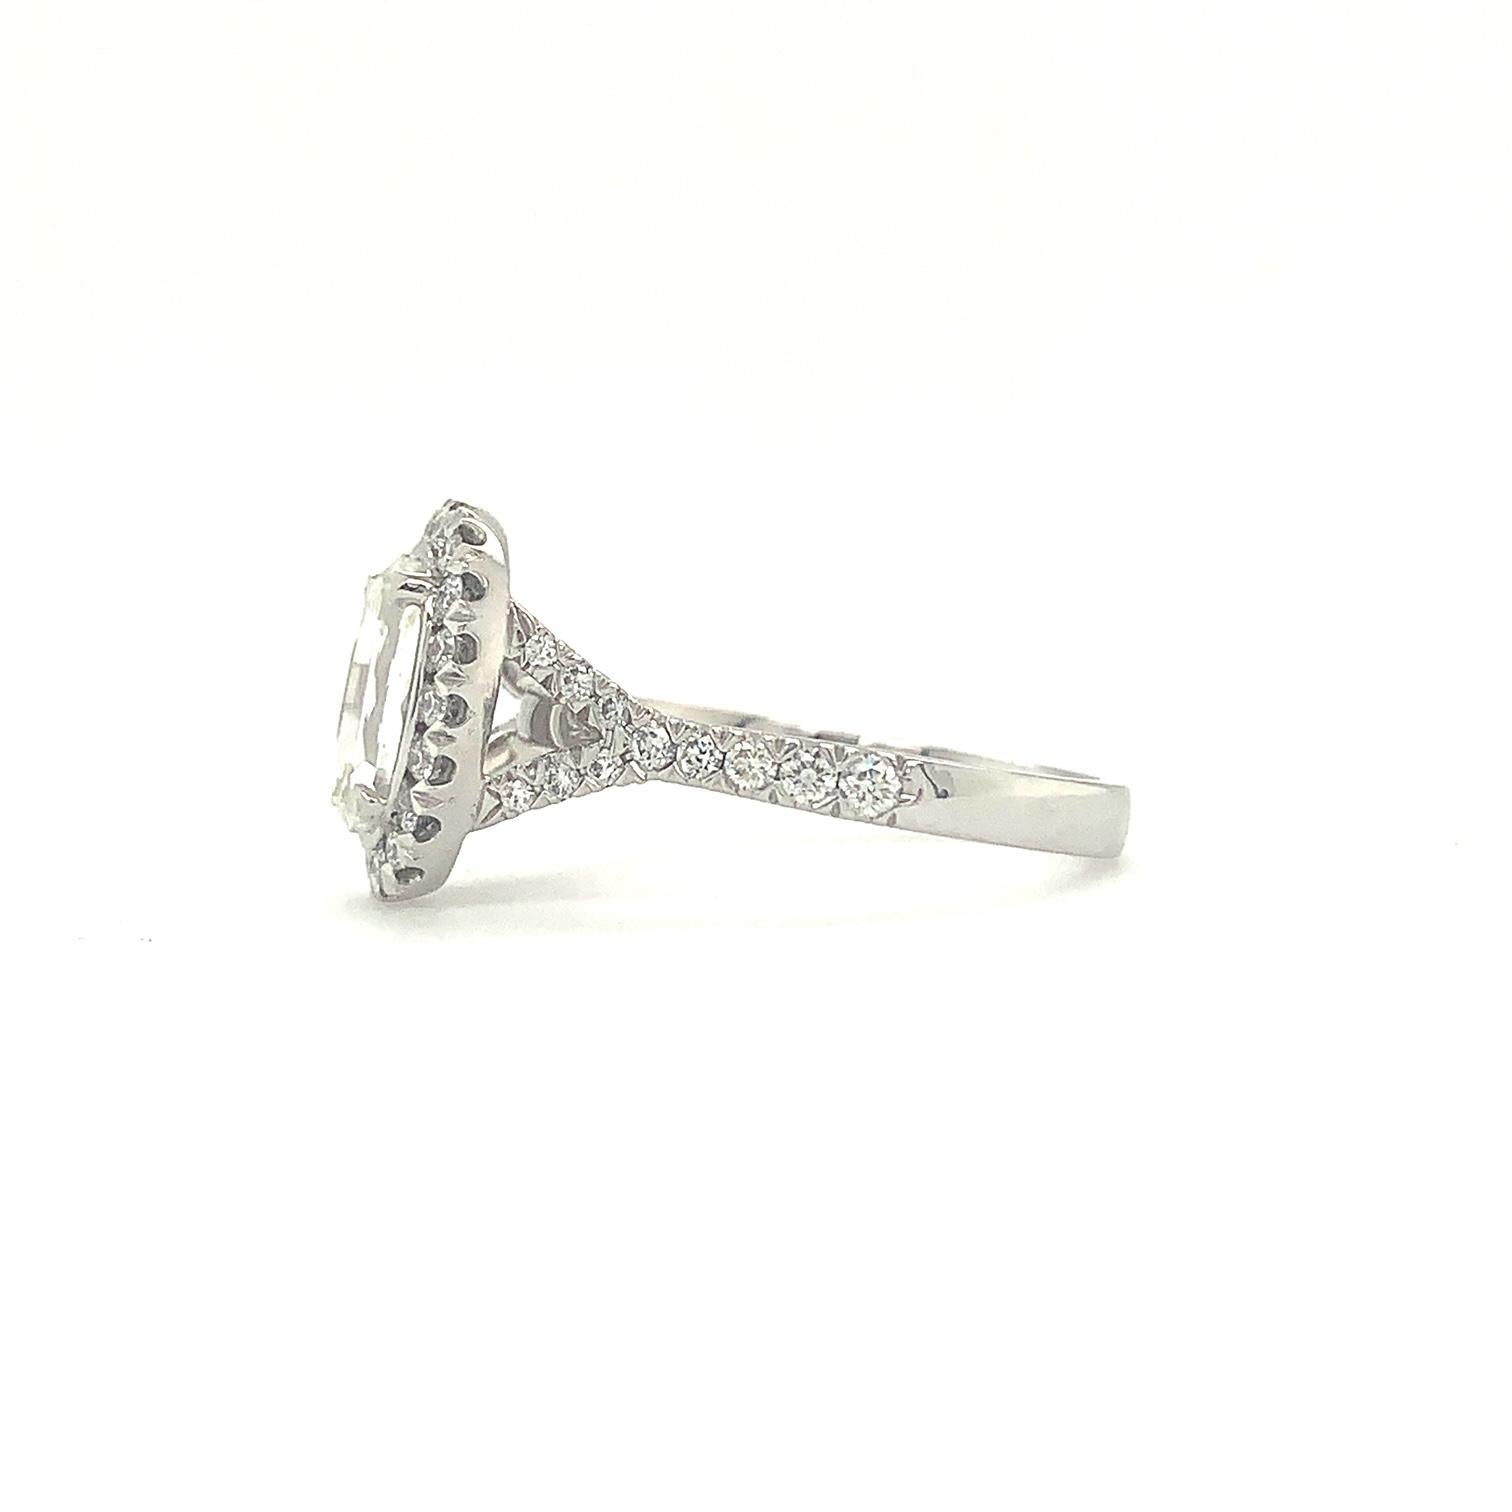 Christopher Designs  L'Amour Crisscut® Oval Diamond Ring  1.52 cts t.w. ﻿ 18K White Gold L'Amour Crisscut

Oval L'Amour Crisscut® Diamond Ring equals 1.07ct

Color: G Clarity: VS 1 

GIA Certified #5283848647

﻿Serial # M47655     

40 Round Diamond